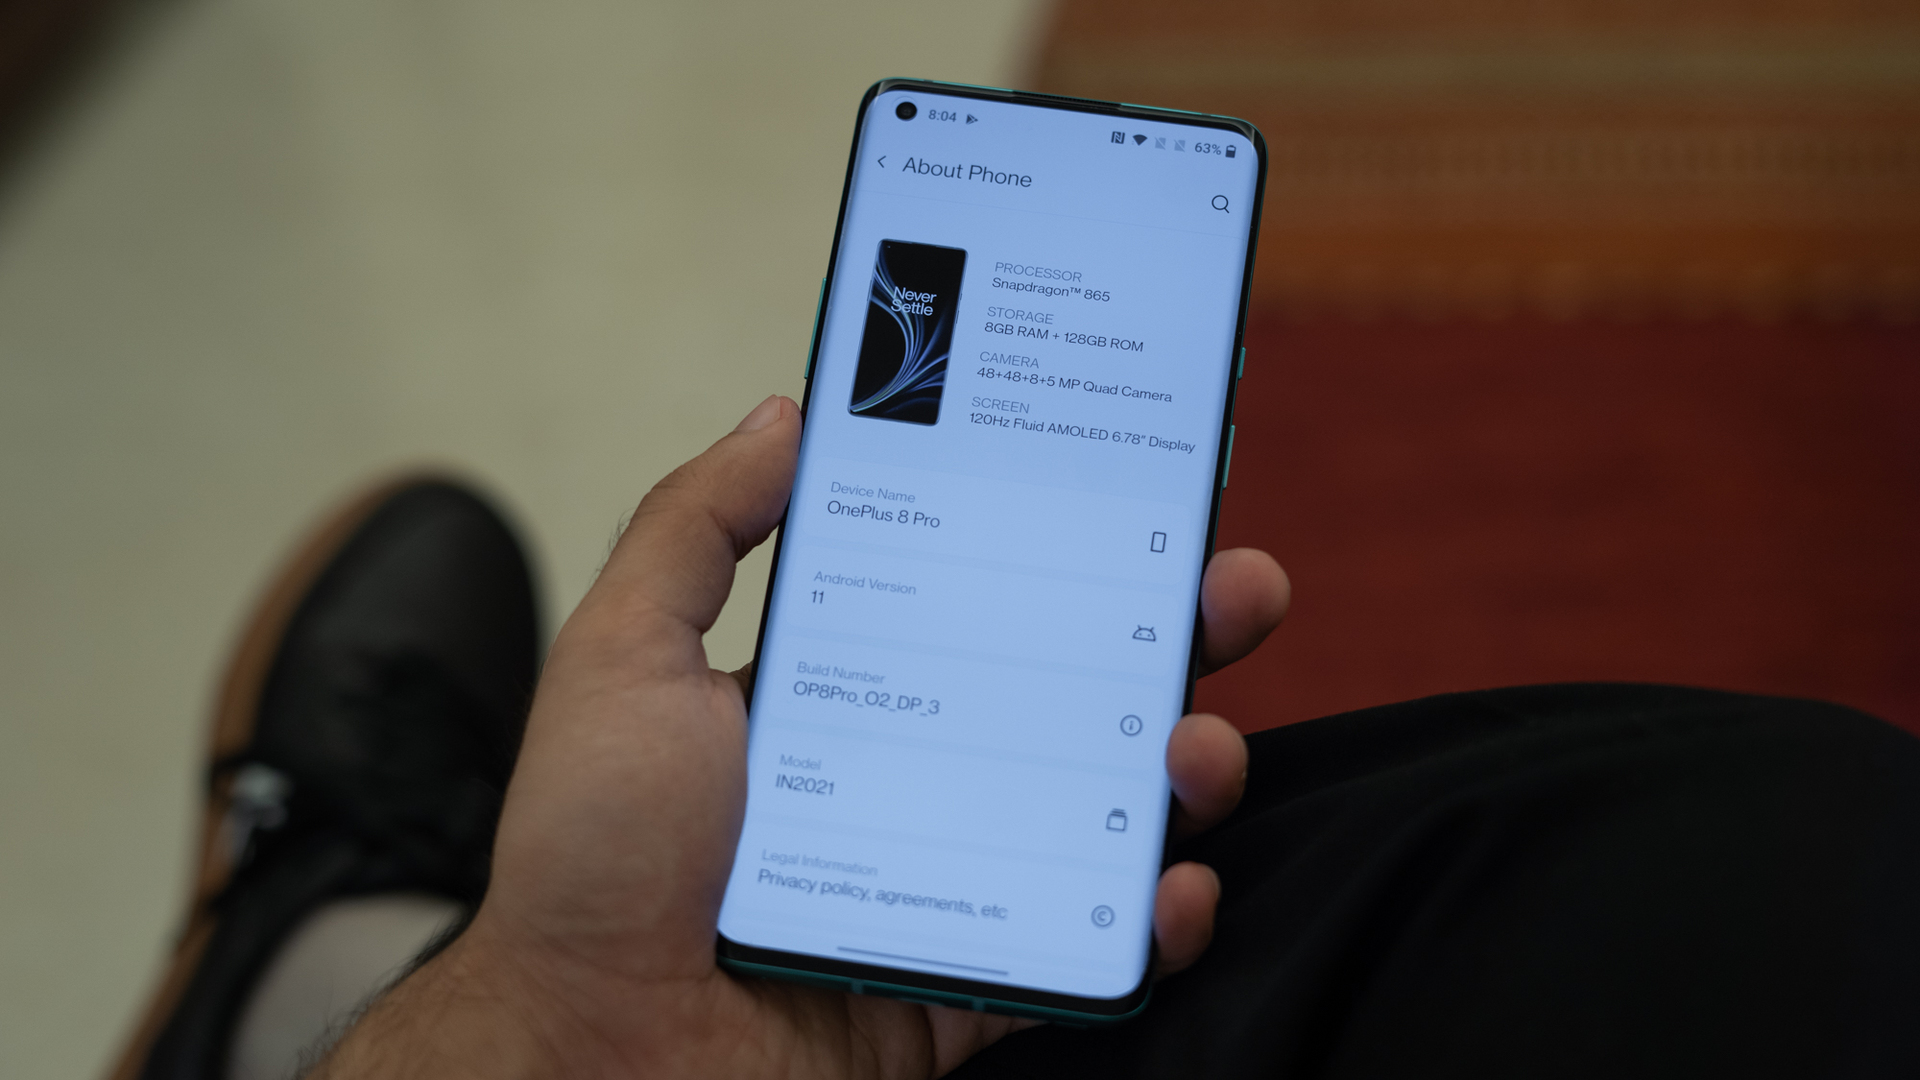 OnePlus 8 Pro bob体育提现Android 11 Dev Preview Android 11关于页面